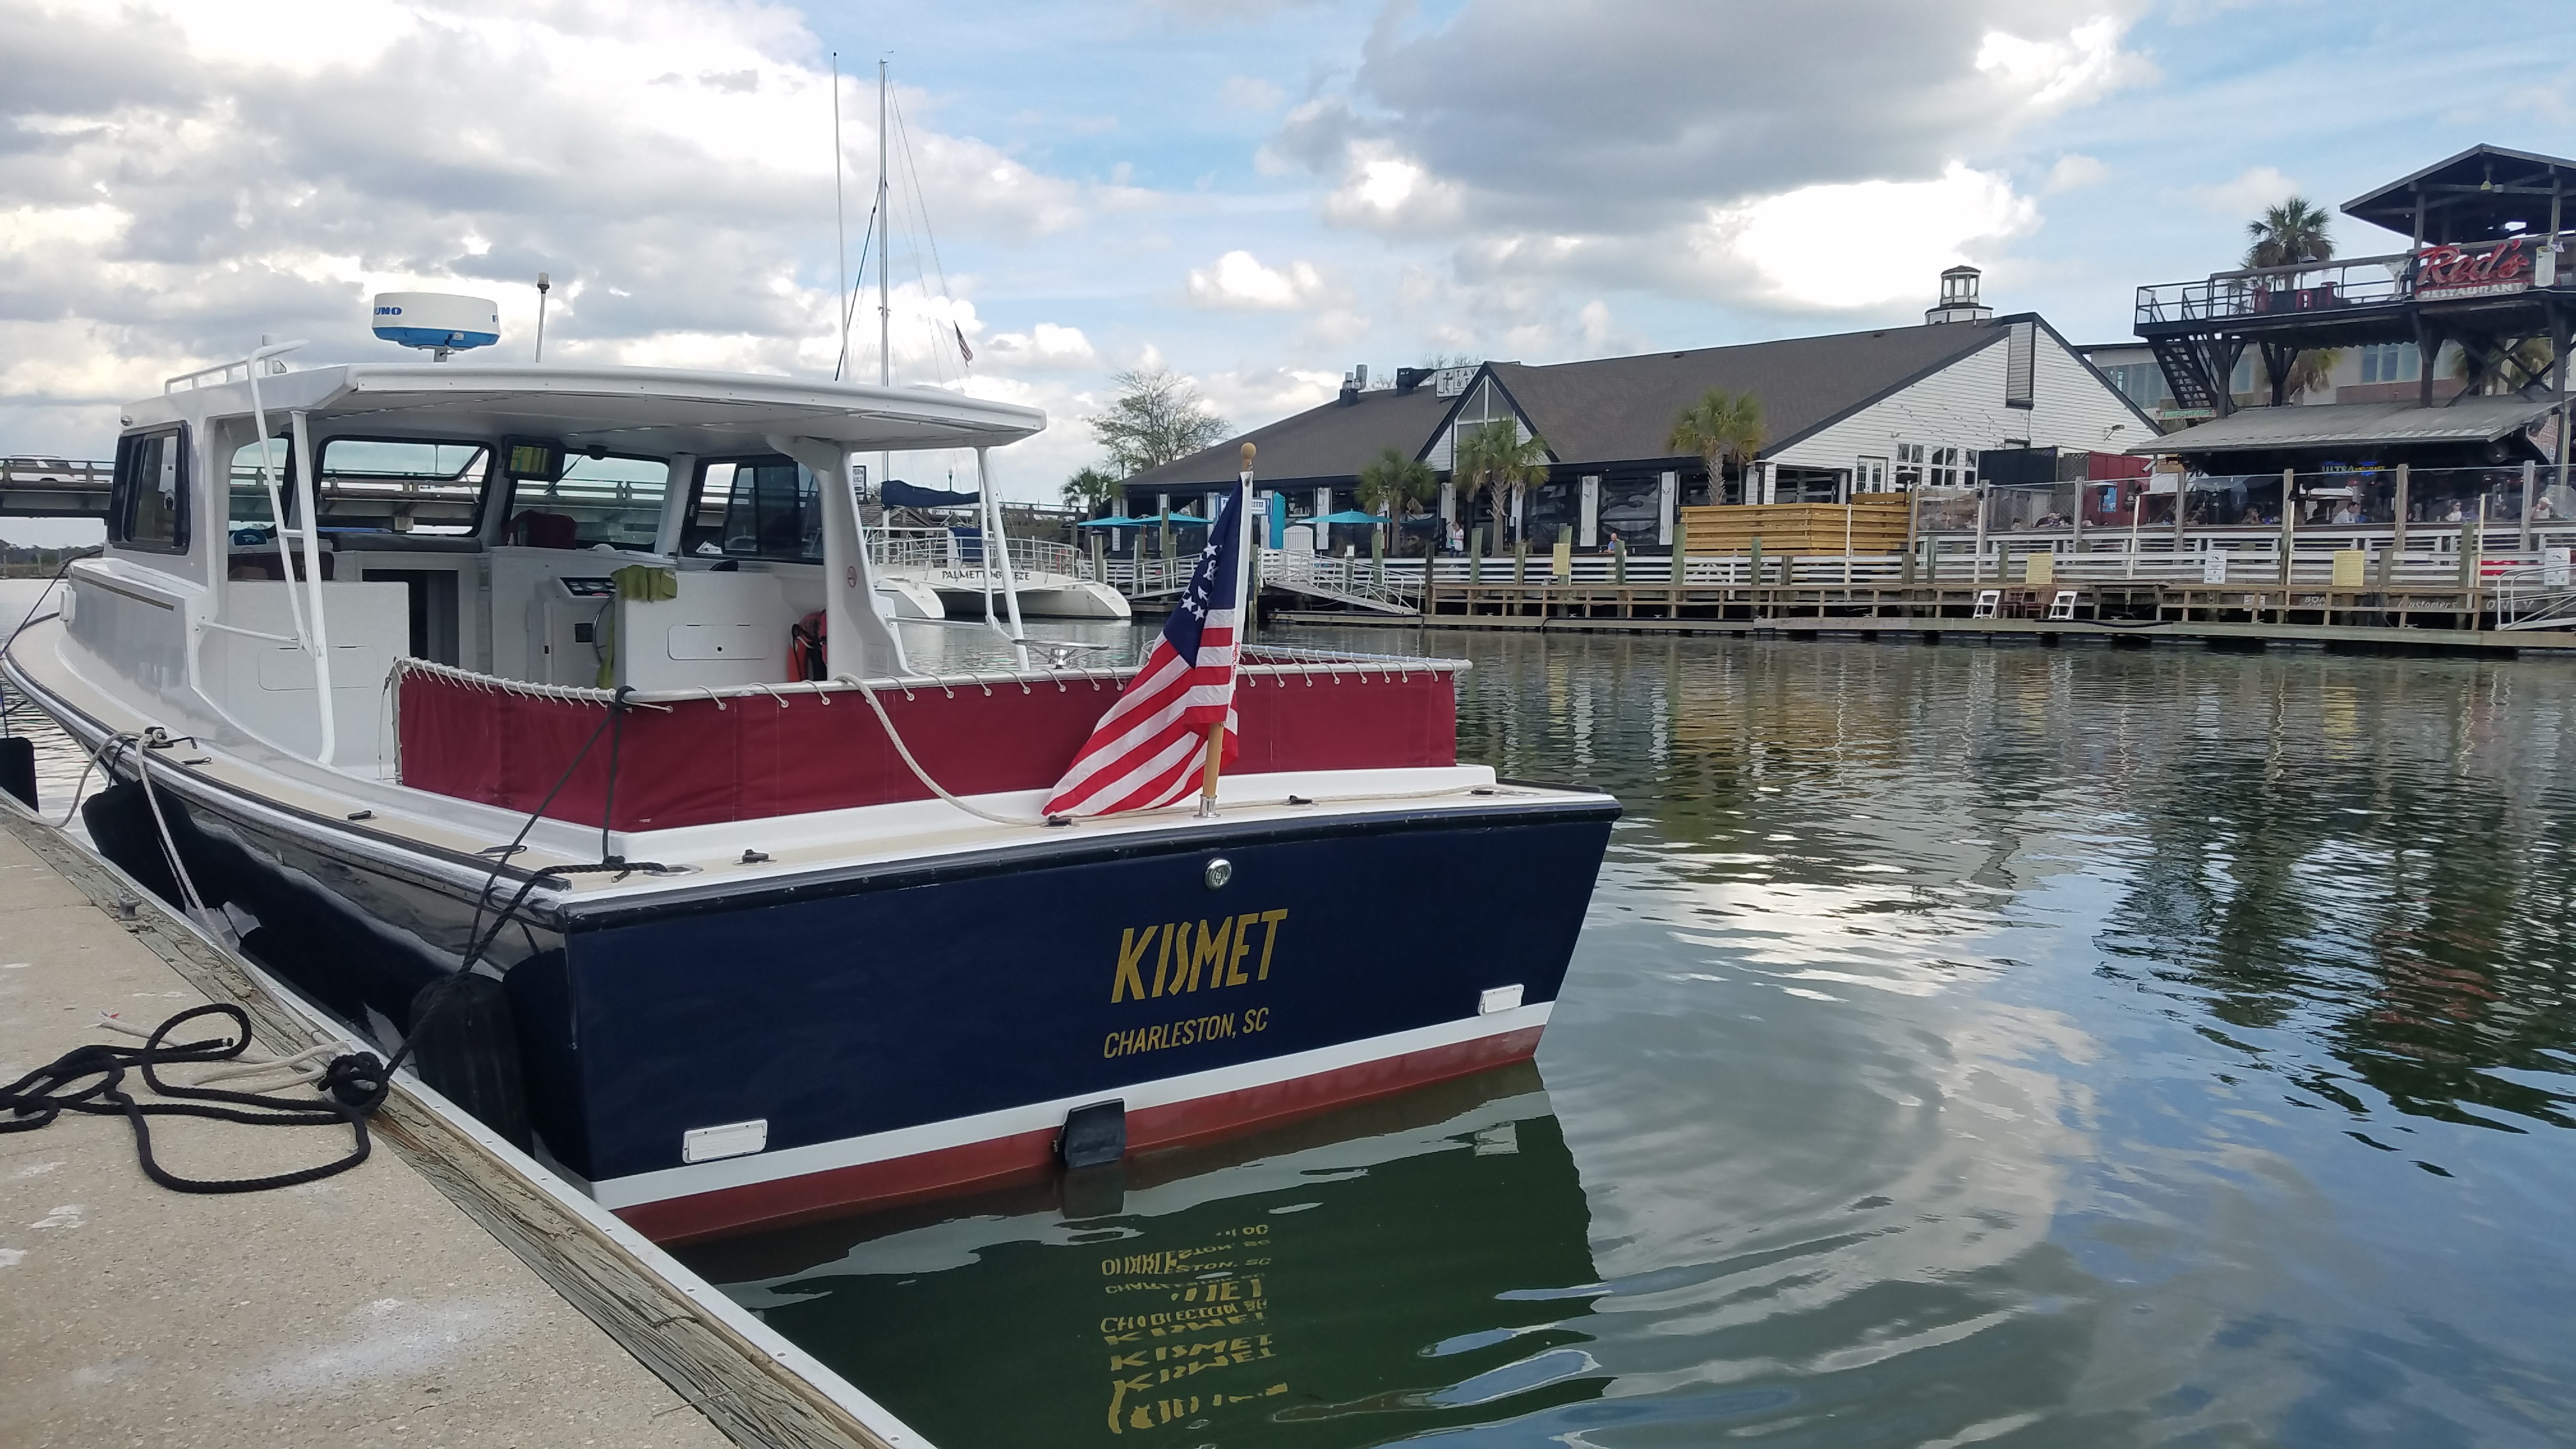 Visit Shem Creek or Other Locations.